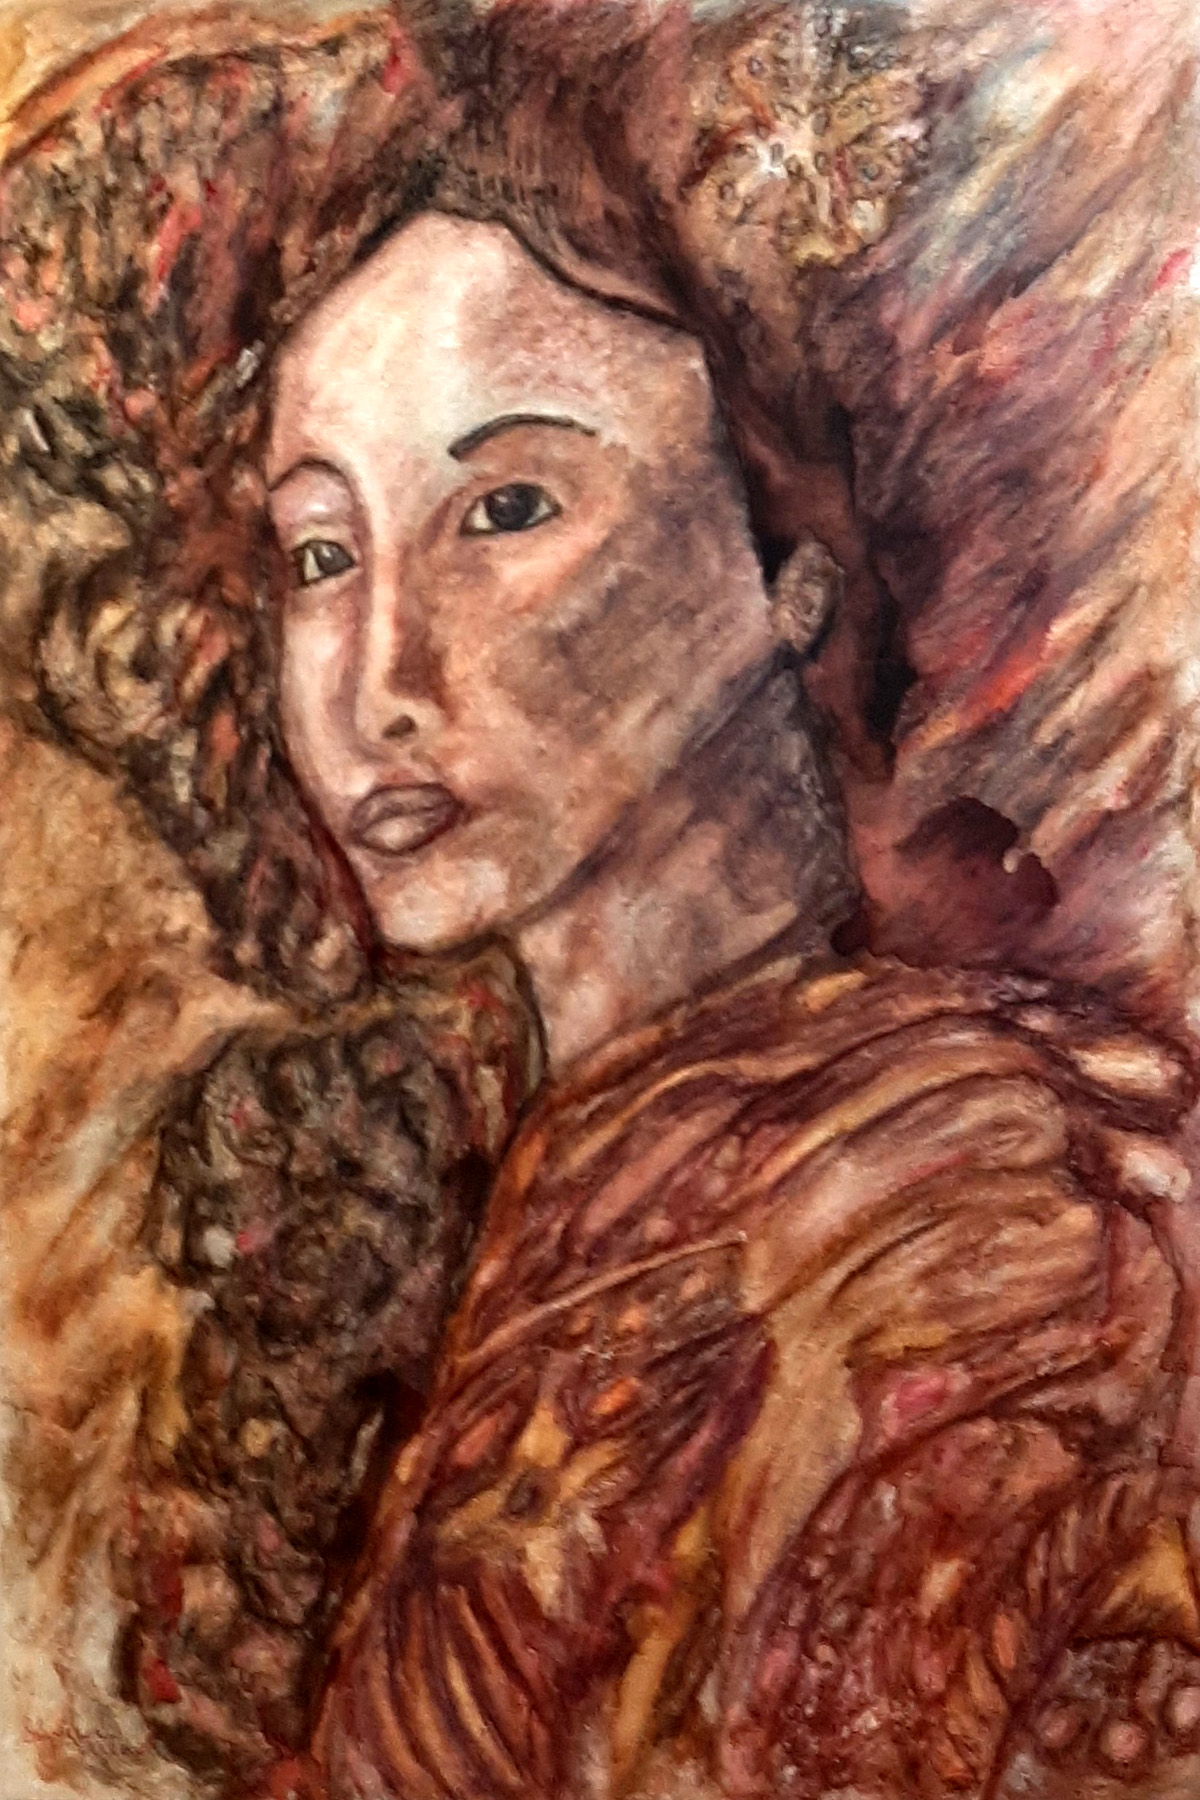 Stephen Mead: 'Shima', 1998 Watercolor, Healing. From the award- winning series Heroines Unlikely, incorporated into the book Selected Works, available through Amazon or Lulu.  com. ...